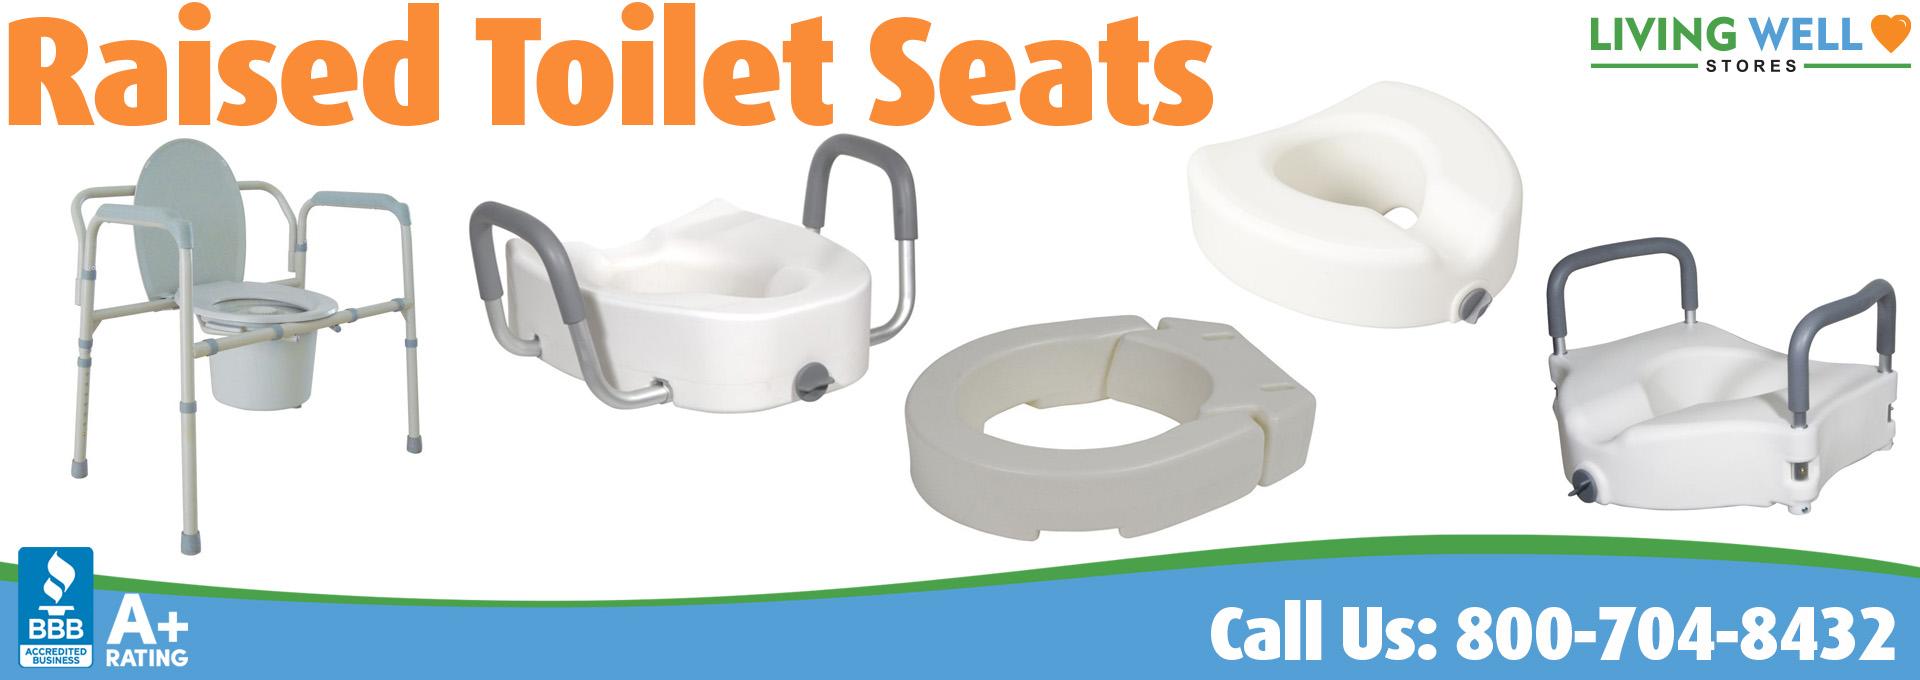 Living Well Stores: Raised Toilet Seats